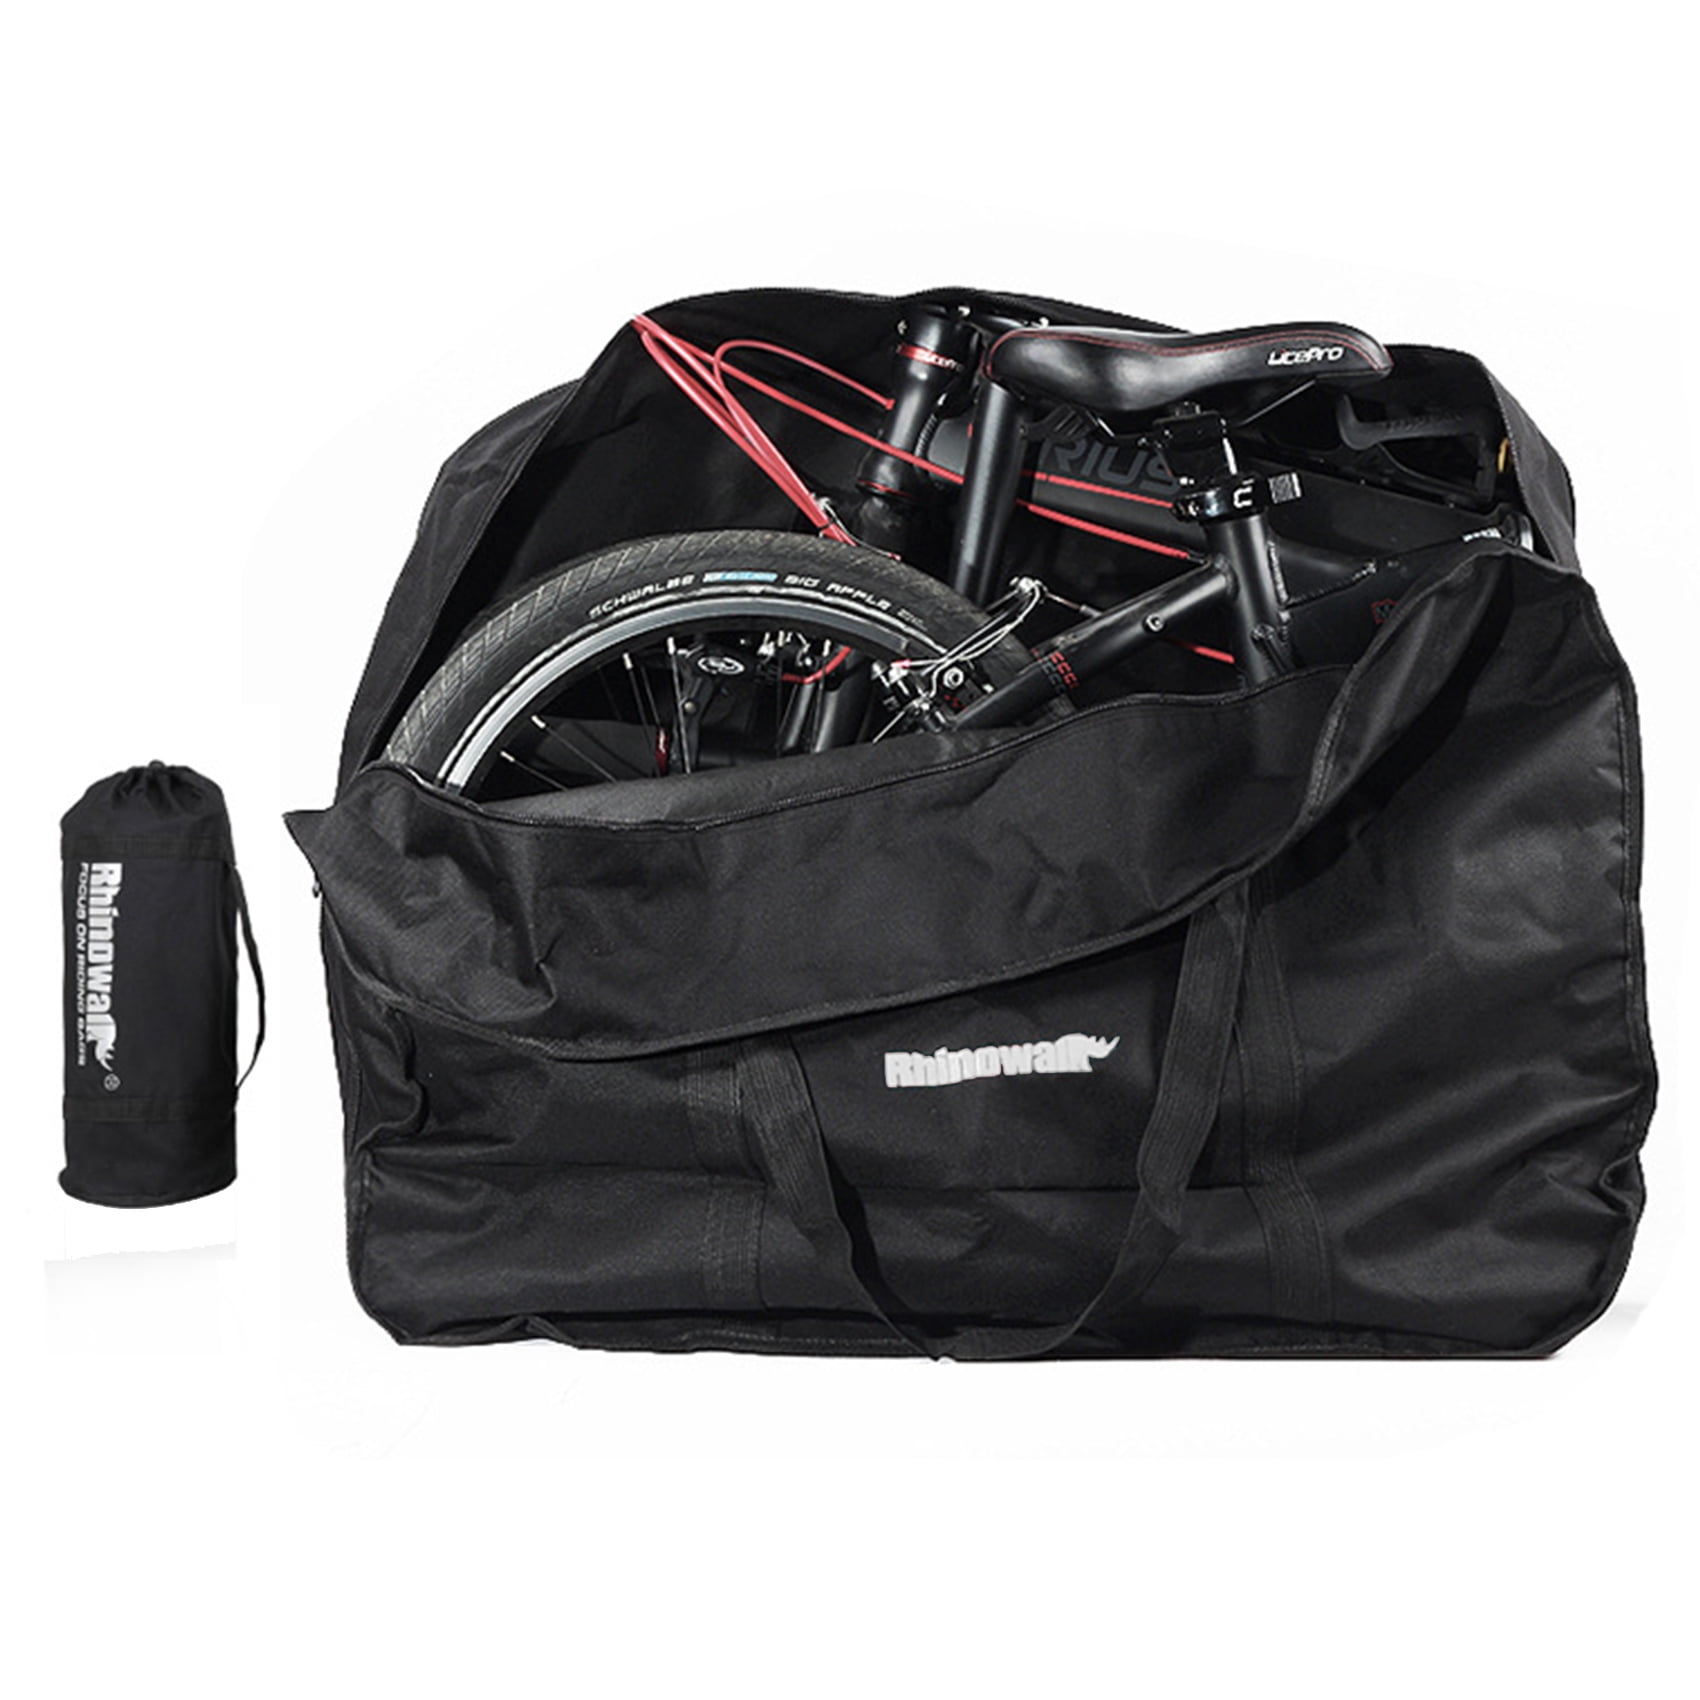 Folding Bicycle Carry Bag Outdoor Cycling Carrying Travel-Case ...